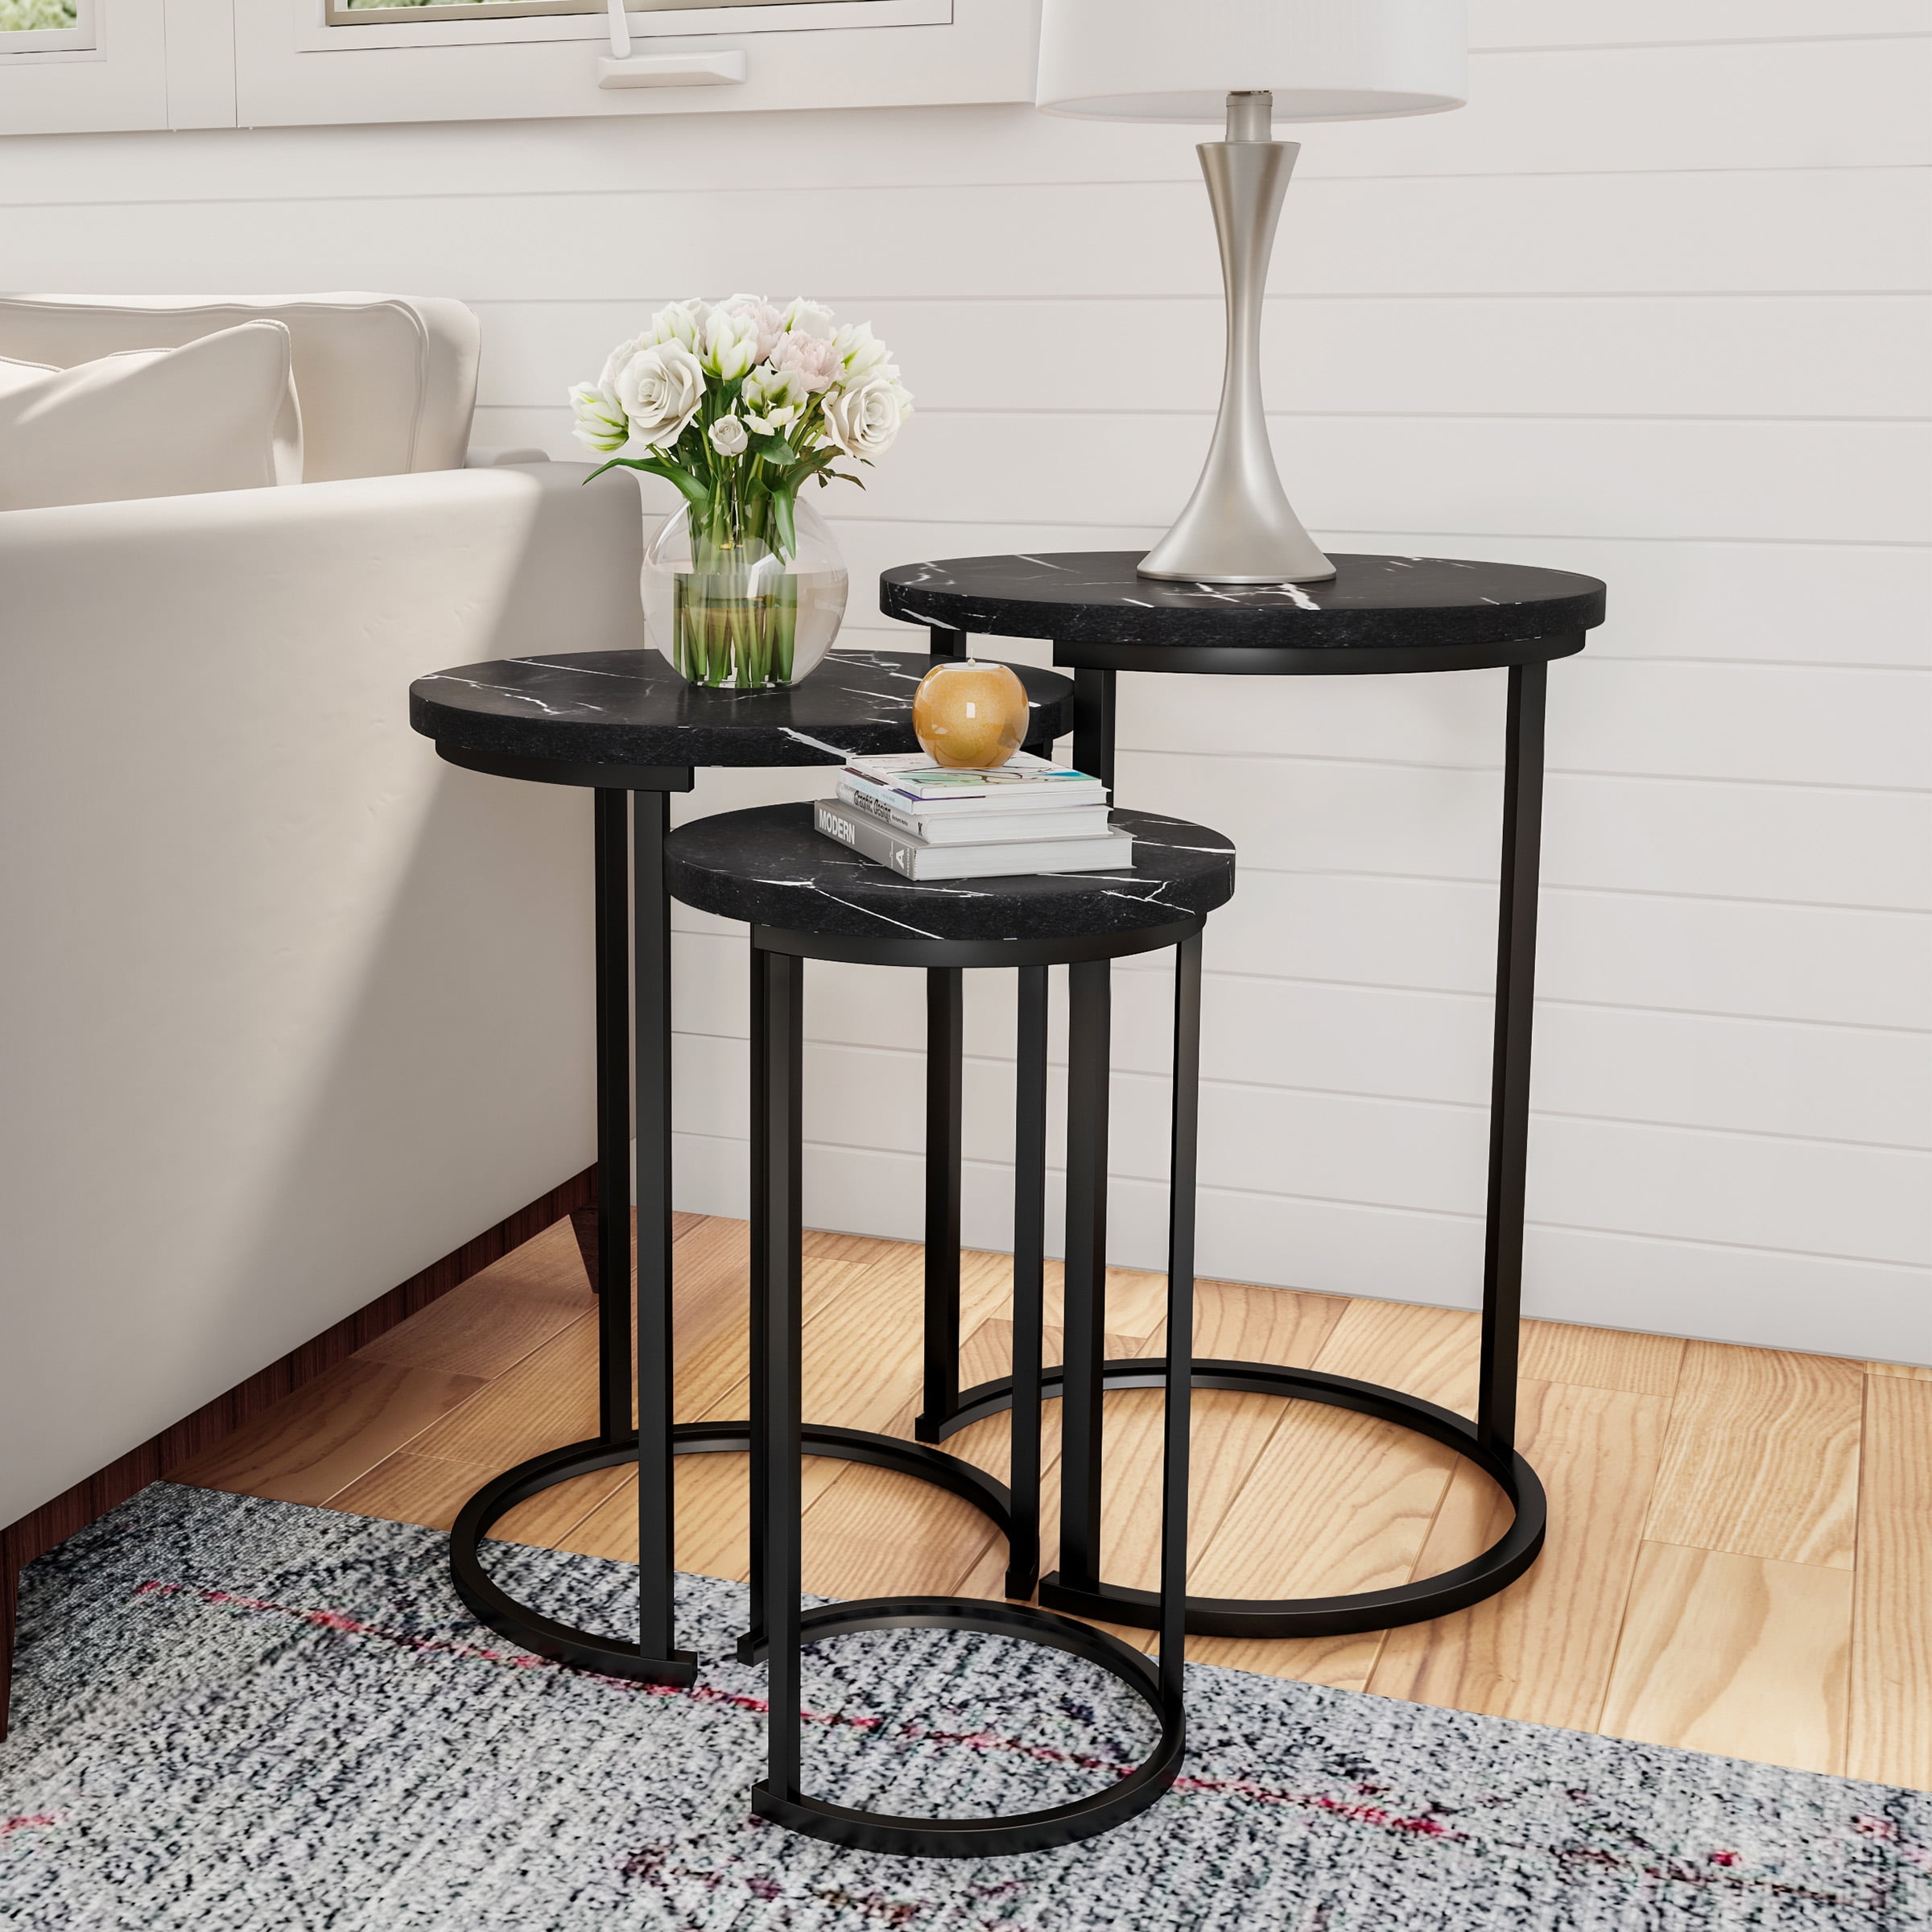 Set of 2 Bjorn Tables Stylish & Compact Nest Of Tables Add Style To Your Home 